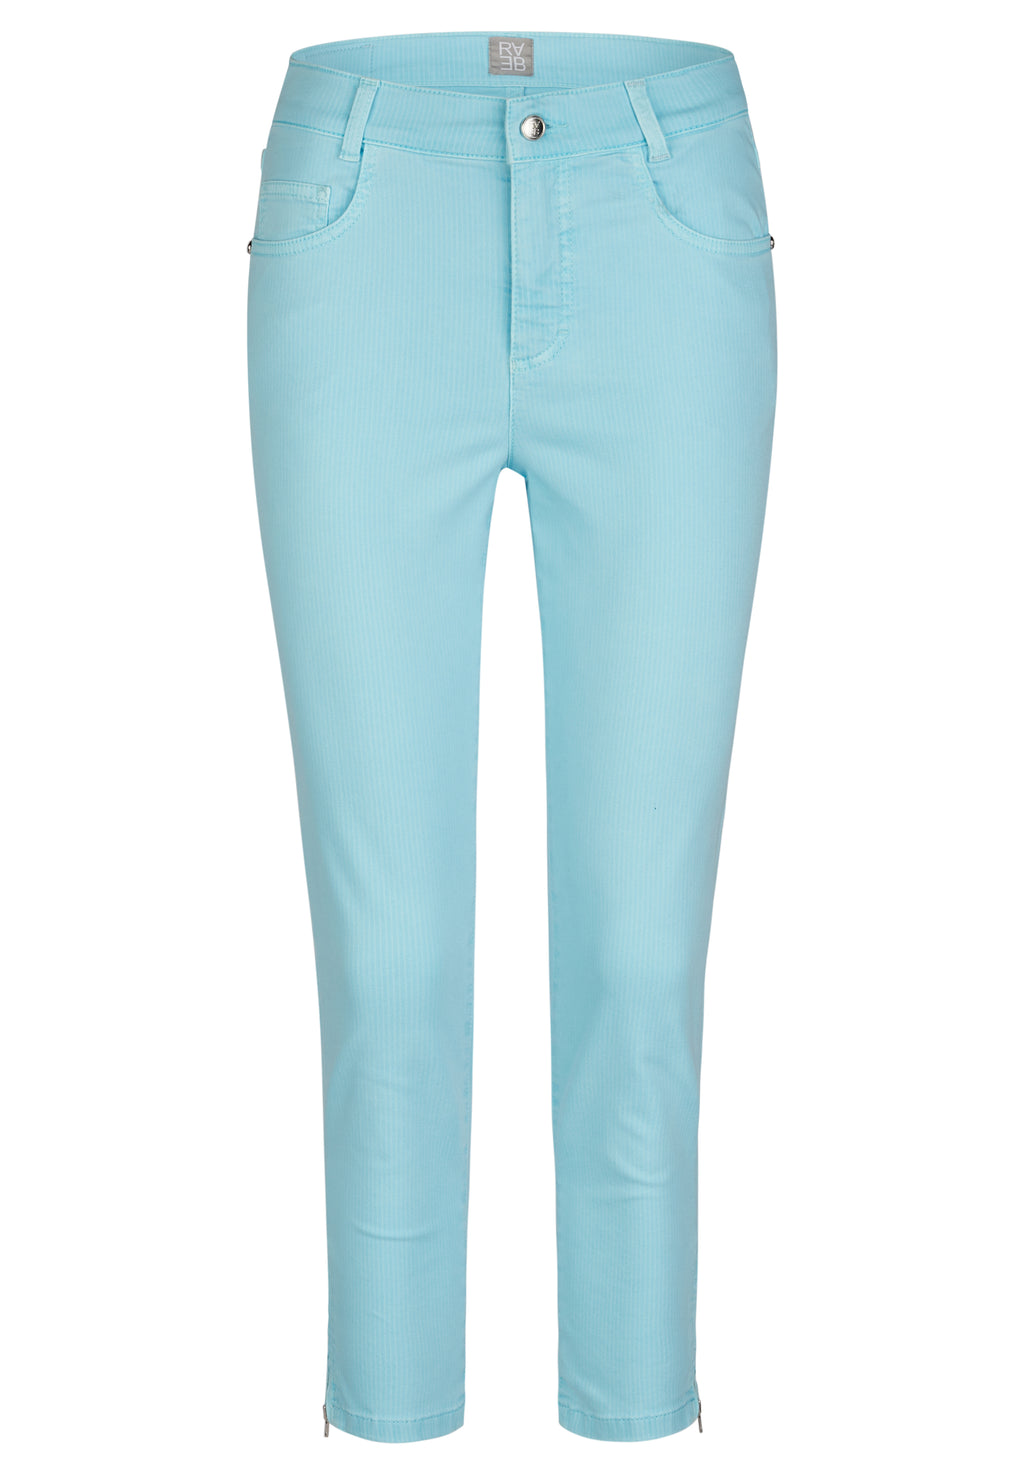 Rabe salty breeze collection pinstripe 7/8th leg jeans in sky blue and white, product code 52-223150